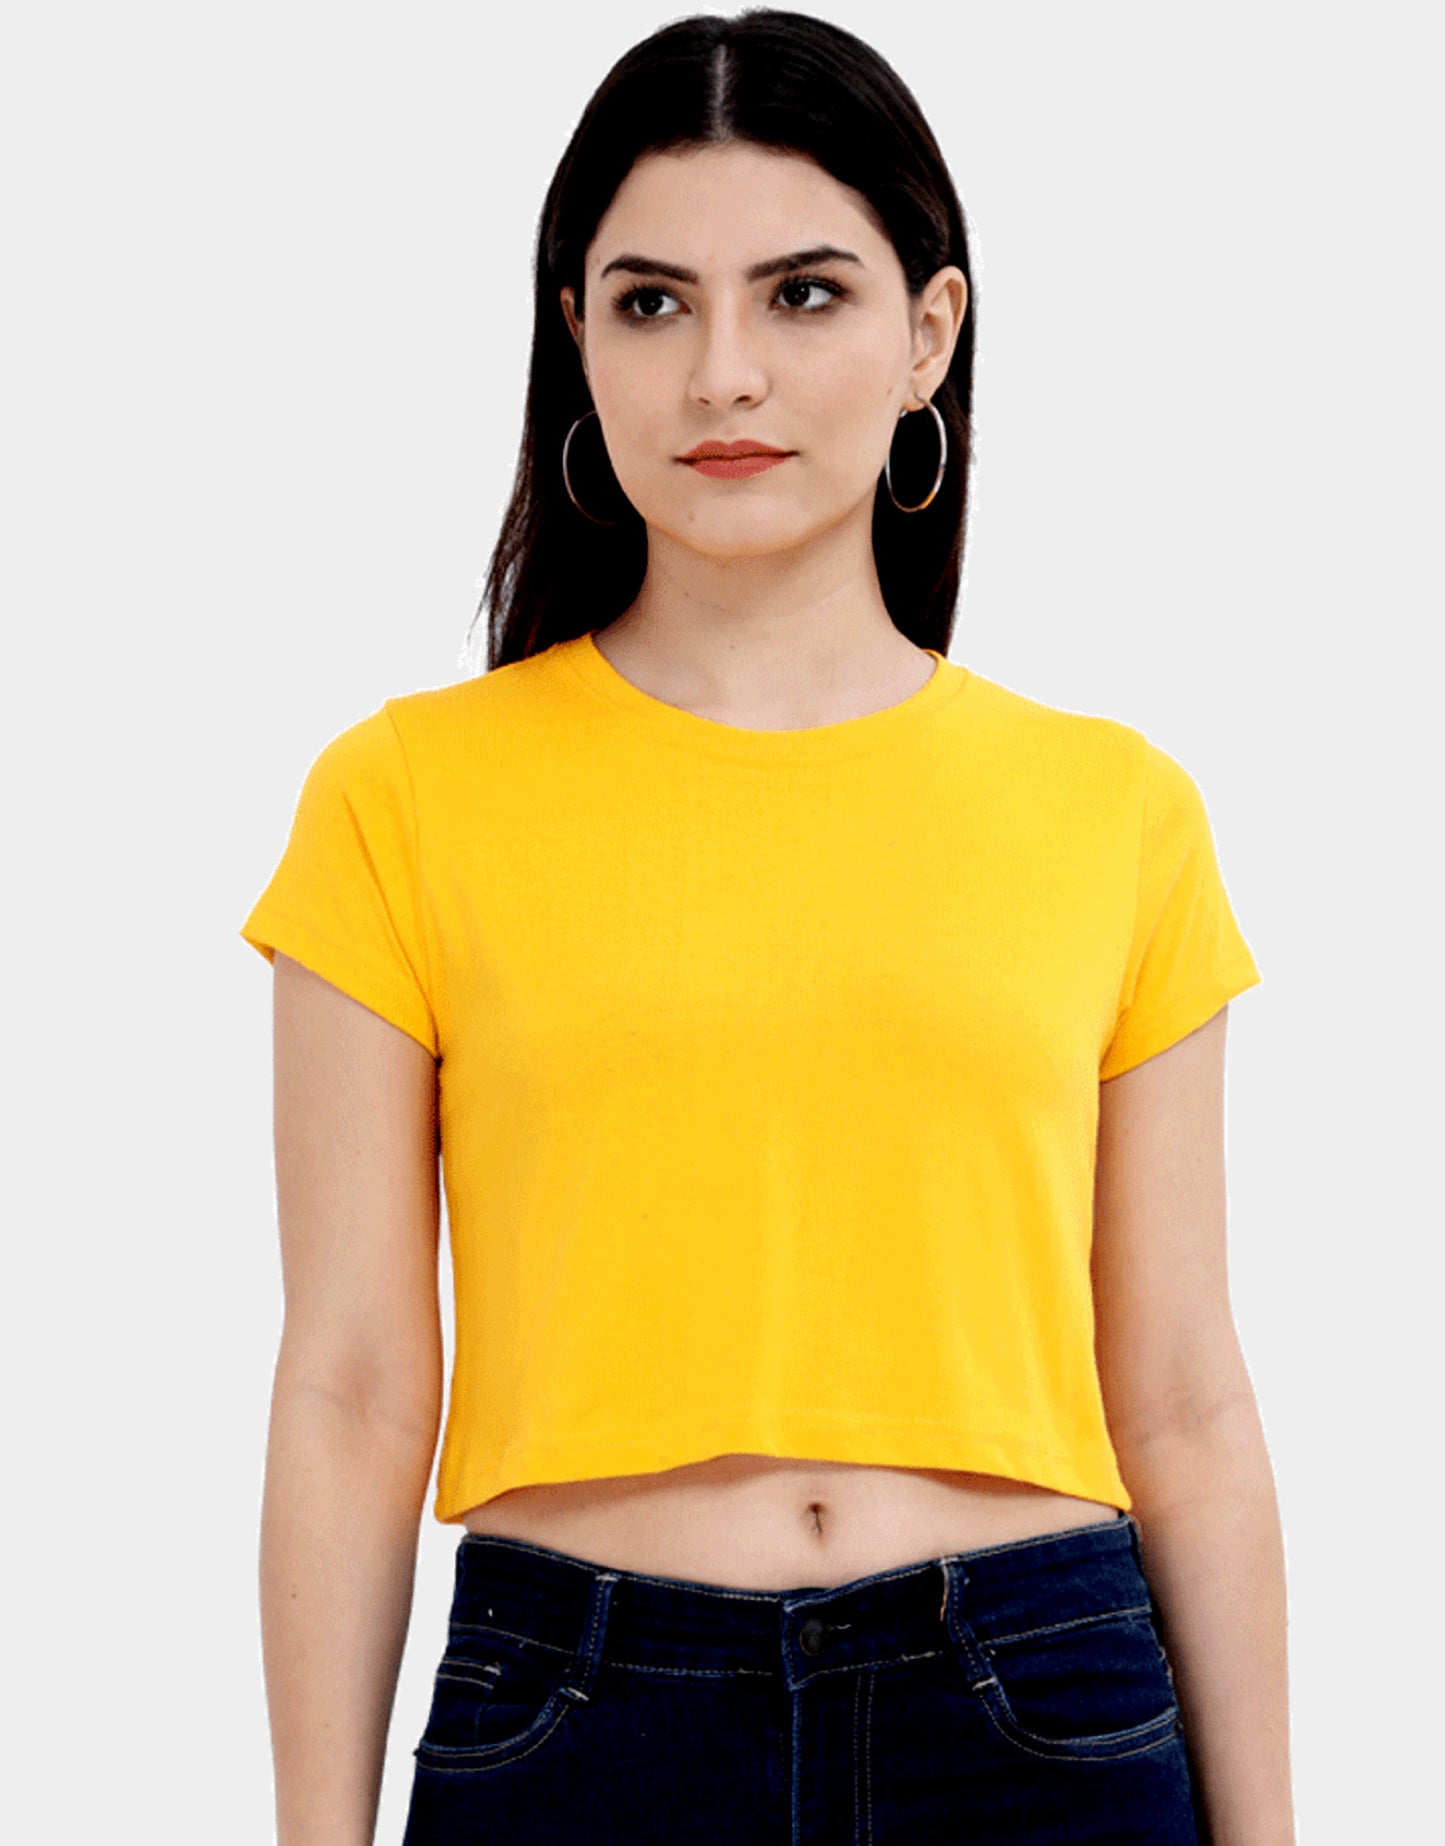 Mustard Yellow color - Stylish Short sleeve Crop Top for women